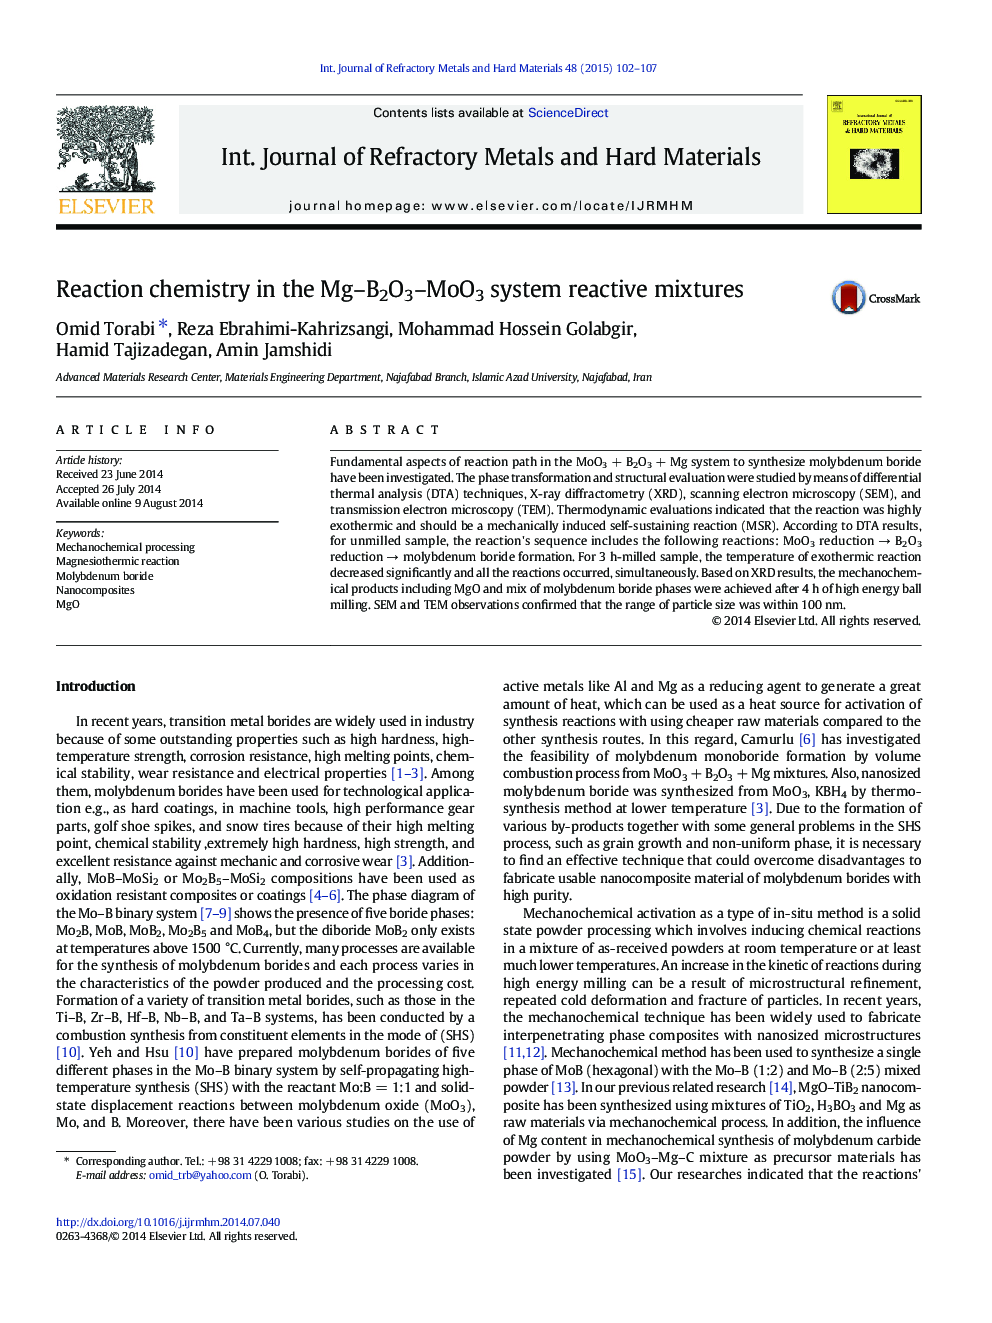 Reaction chemistry in the Mg-B2O3-MoO3 system reactive mixtures